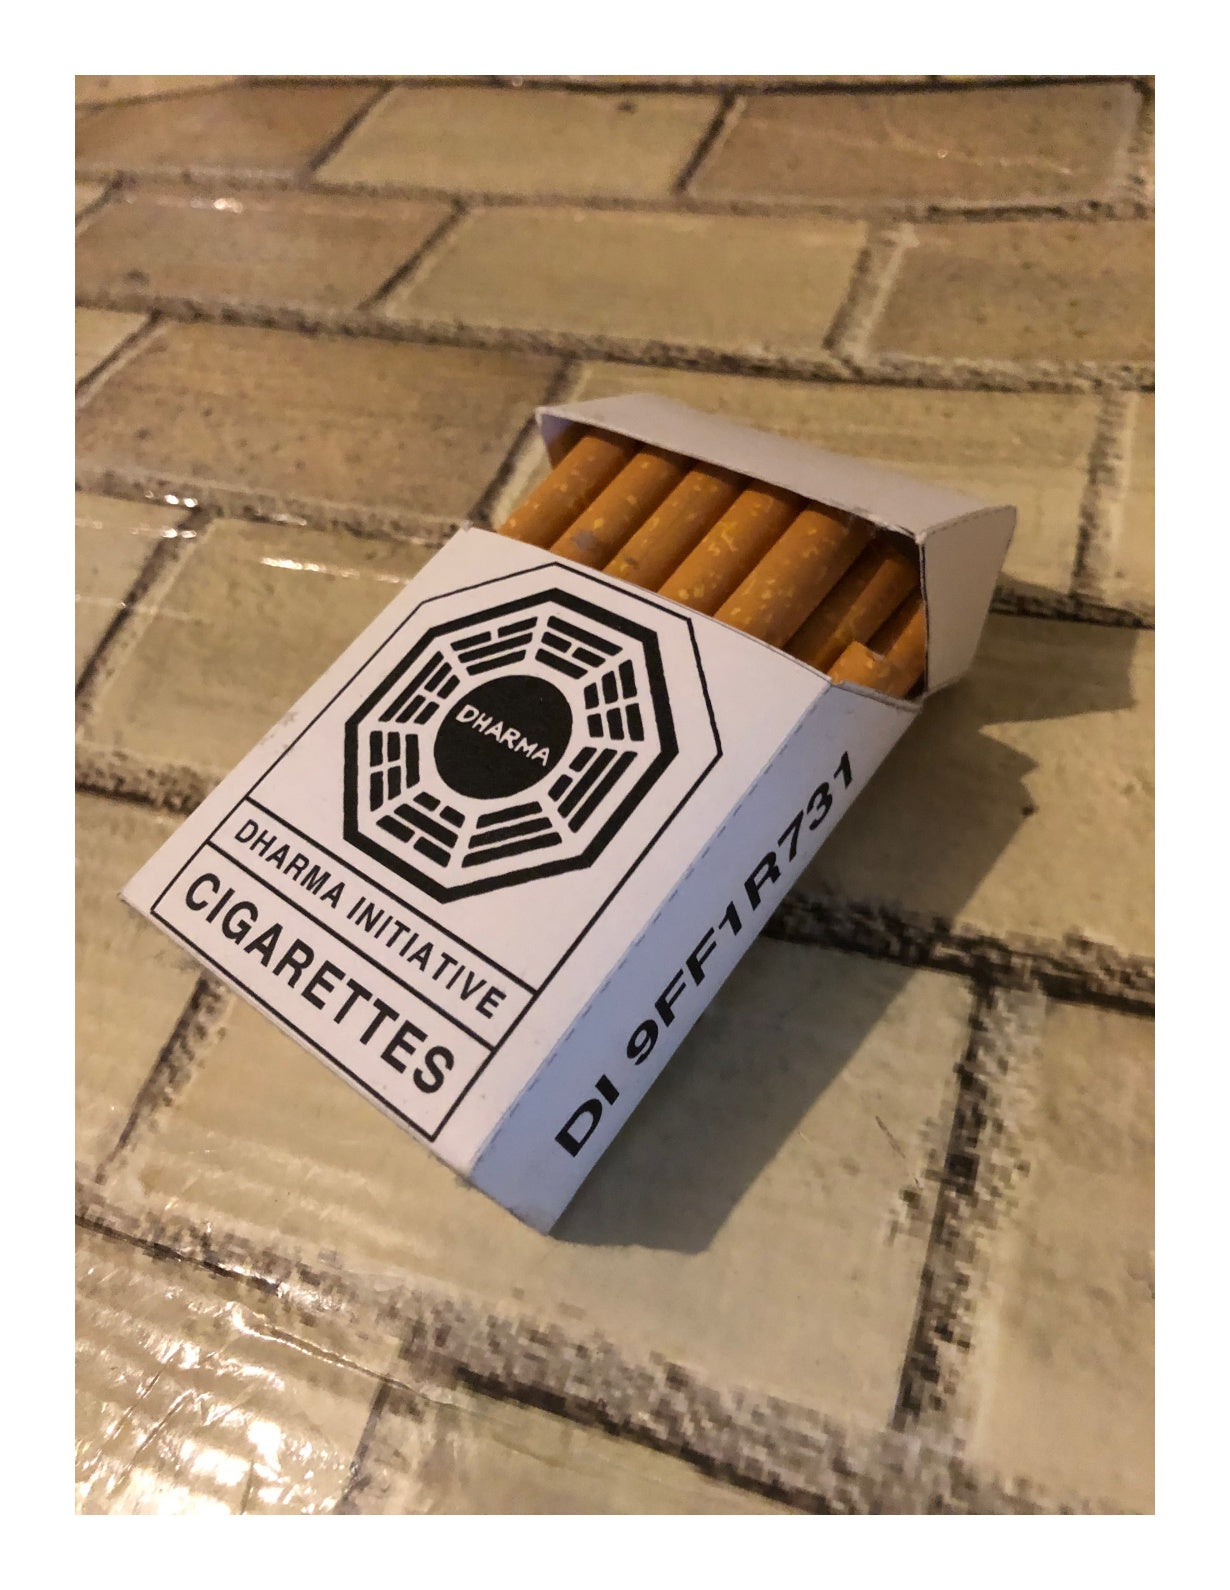 "LOST" Dharma Initiative Fan Made Cigarette Packet (Prop)